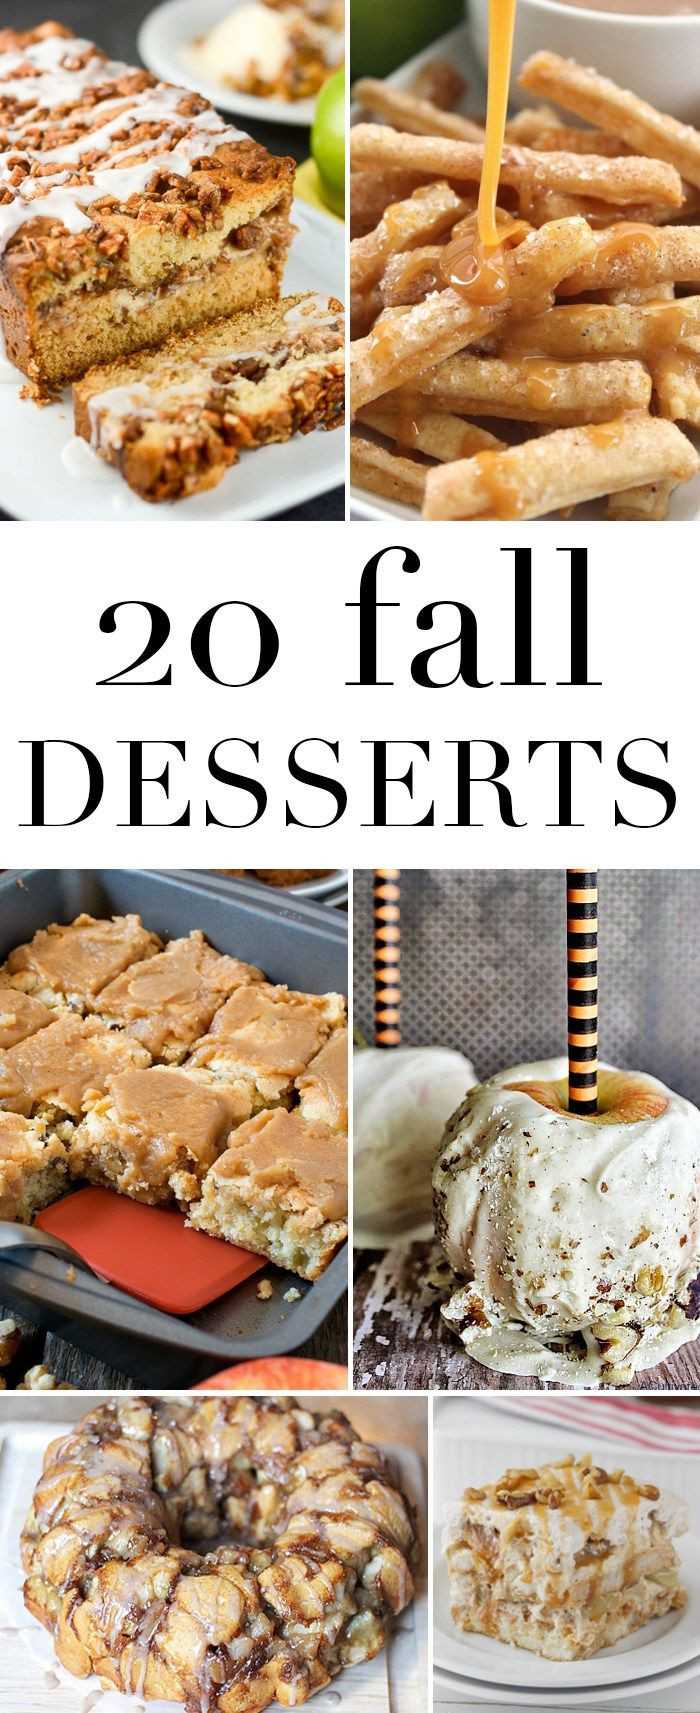 Fall Desserts Recipe
 92 best images about Seasonal Fall on Pinterest